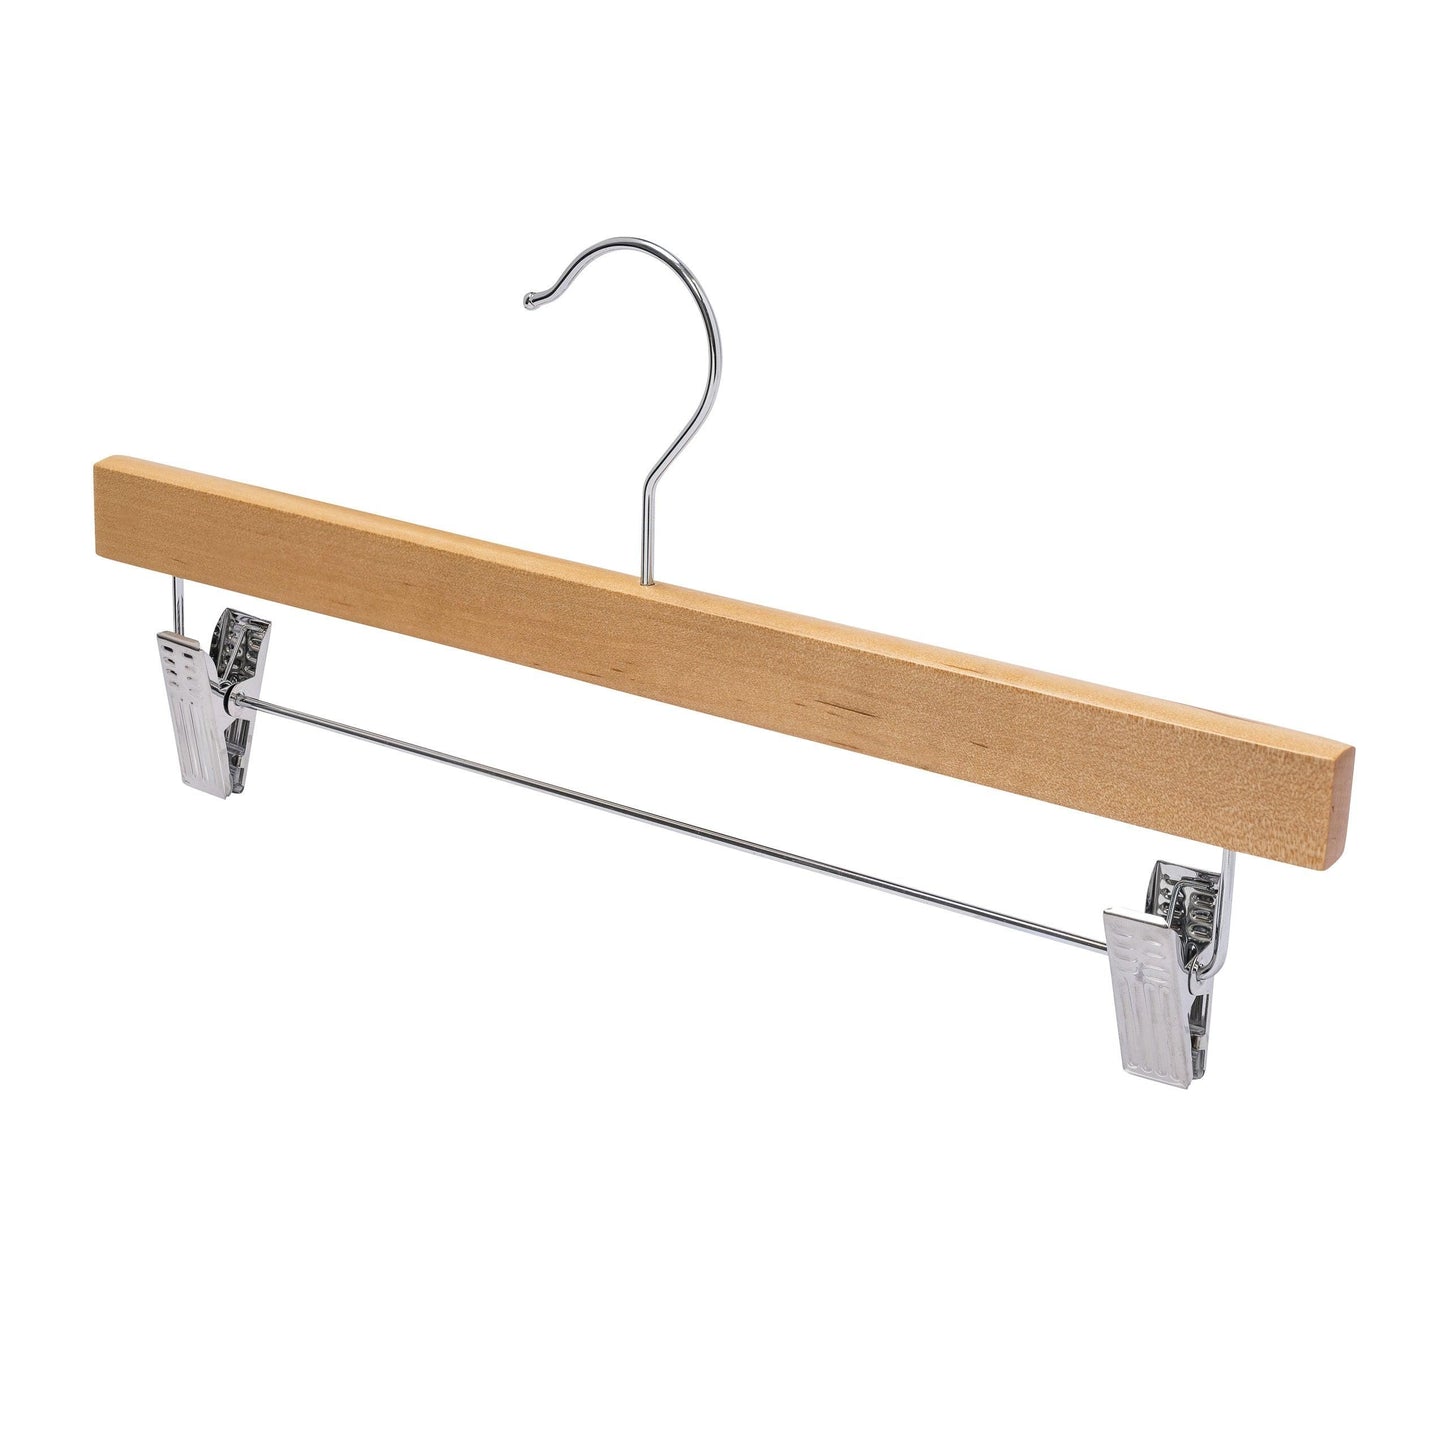 Natural Wood Hangers With Clips 35.5cm X 12mm Thick (Sold in 25/50/100) - Hangersforless